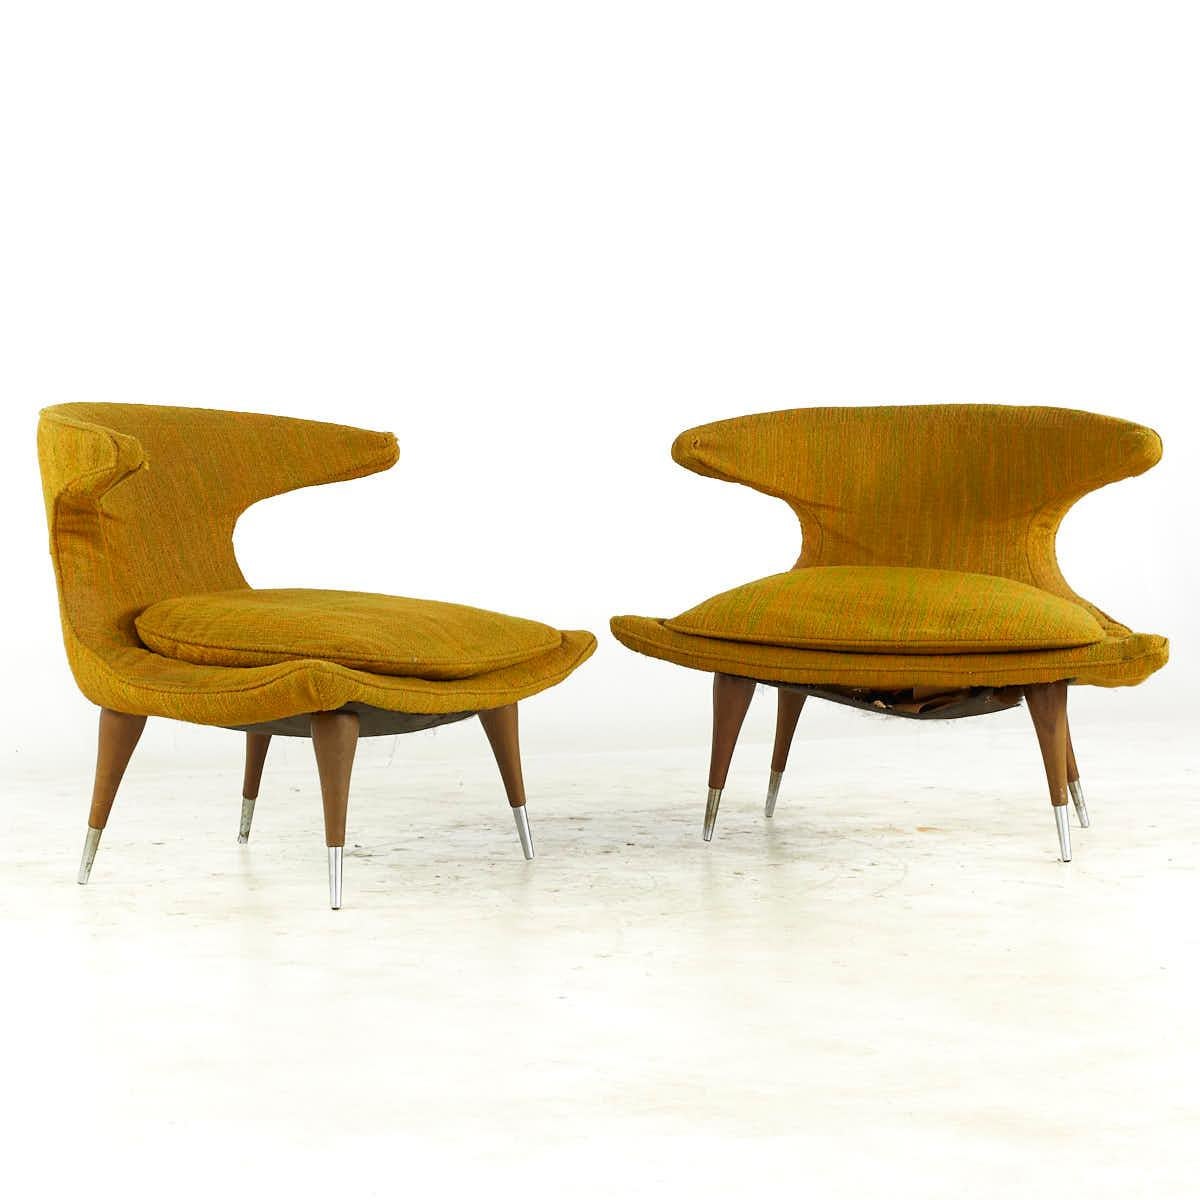 Karpen of California Mid Century Horn Chairs – Pair

Each chair measures: 34.25 wide x 27 deep x 28.25 high, with a seat height of 15 inches

All pieces of furniture can be had in what we call restored vintage condition. That means the piece is